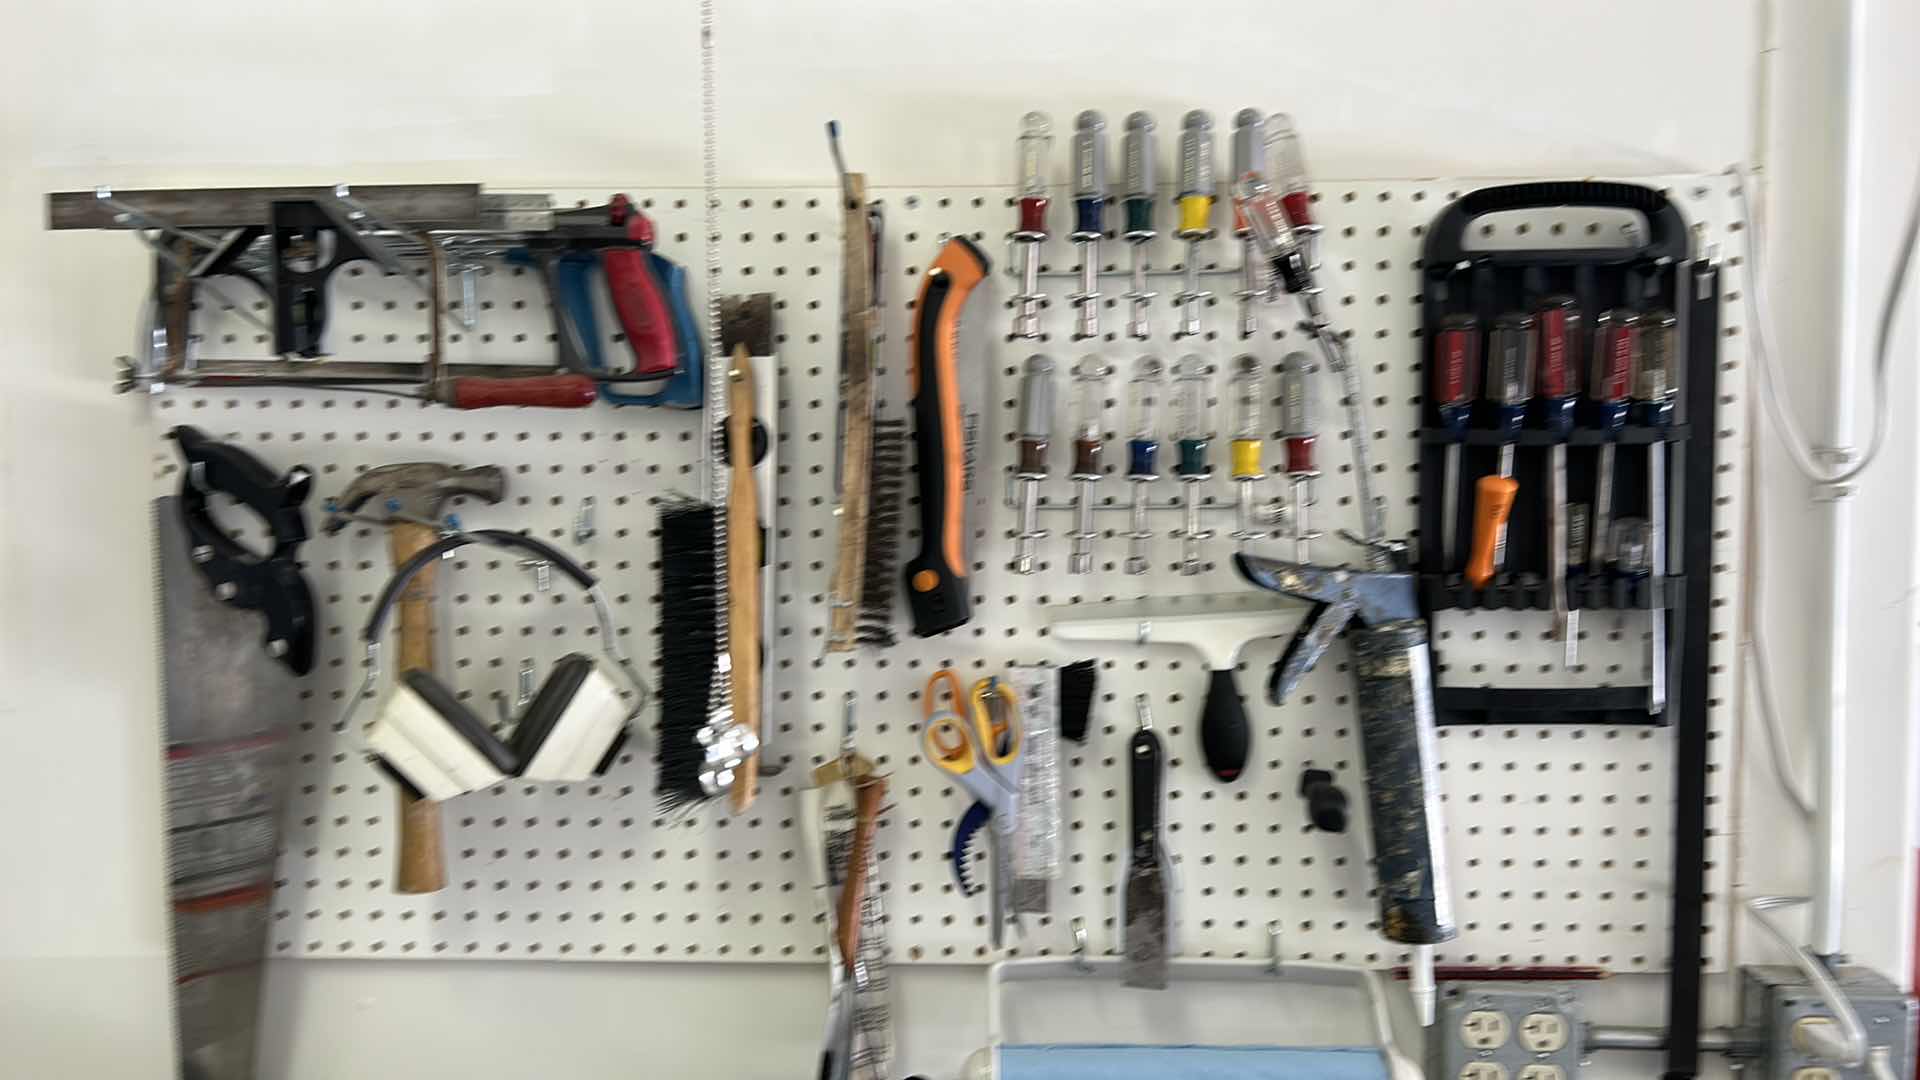 Photo 4 of CONTENTS SIDE WALL IN GARAGE, INCLUDES WORK BENCH, AND ALL TOOLS ON BENCH, PEG BOARD AND HANGING LIGHT FIXTURE 43” x 25.5” x H38”